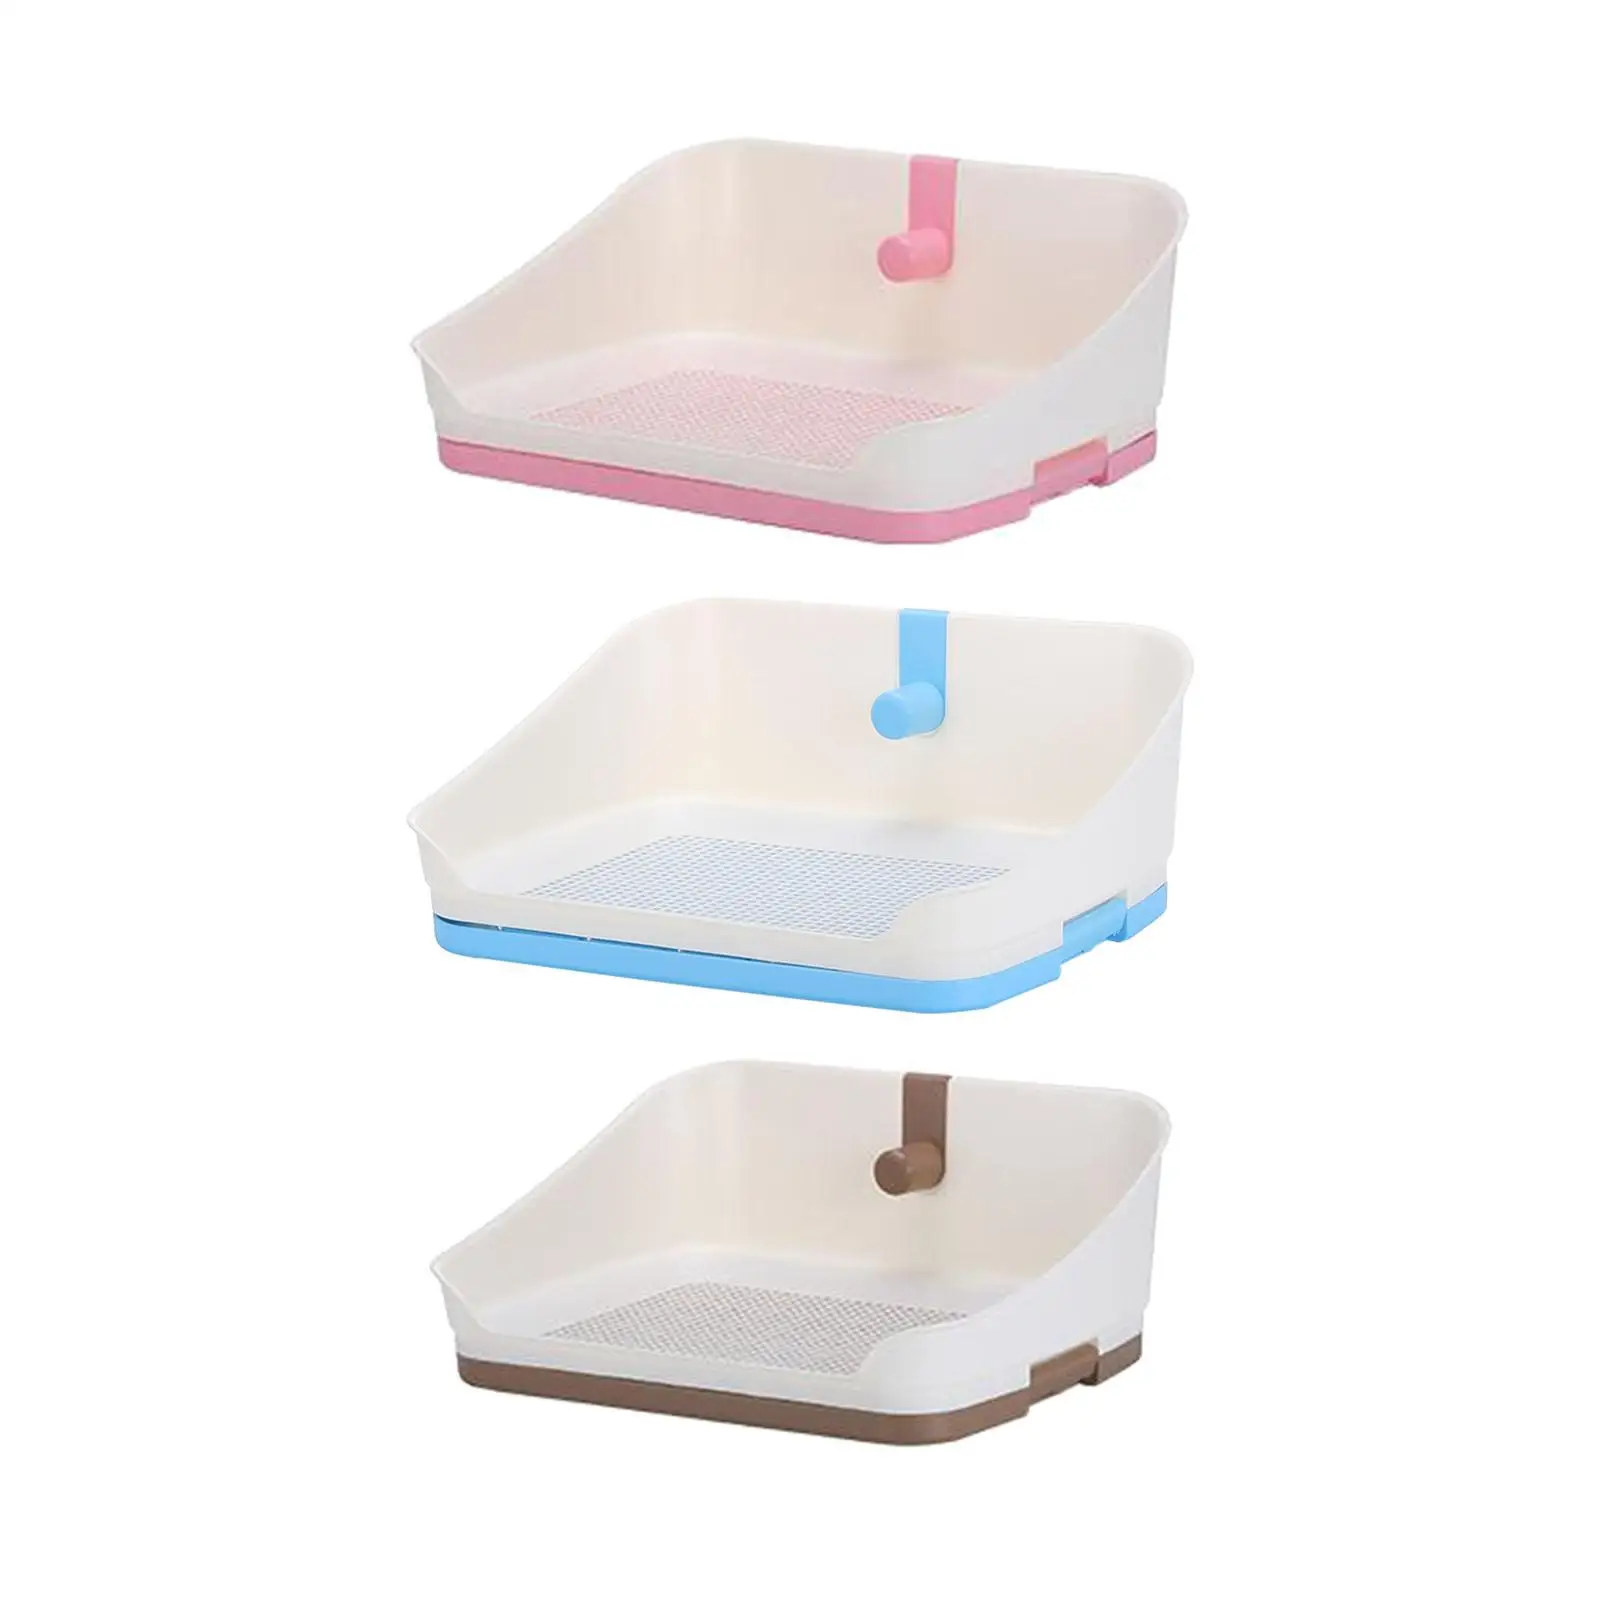 Pet Training Toilet Tray Pee Pad Bedpan for Small Medium and Large Dogs